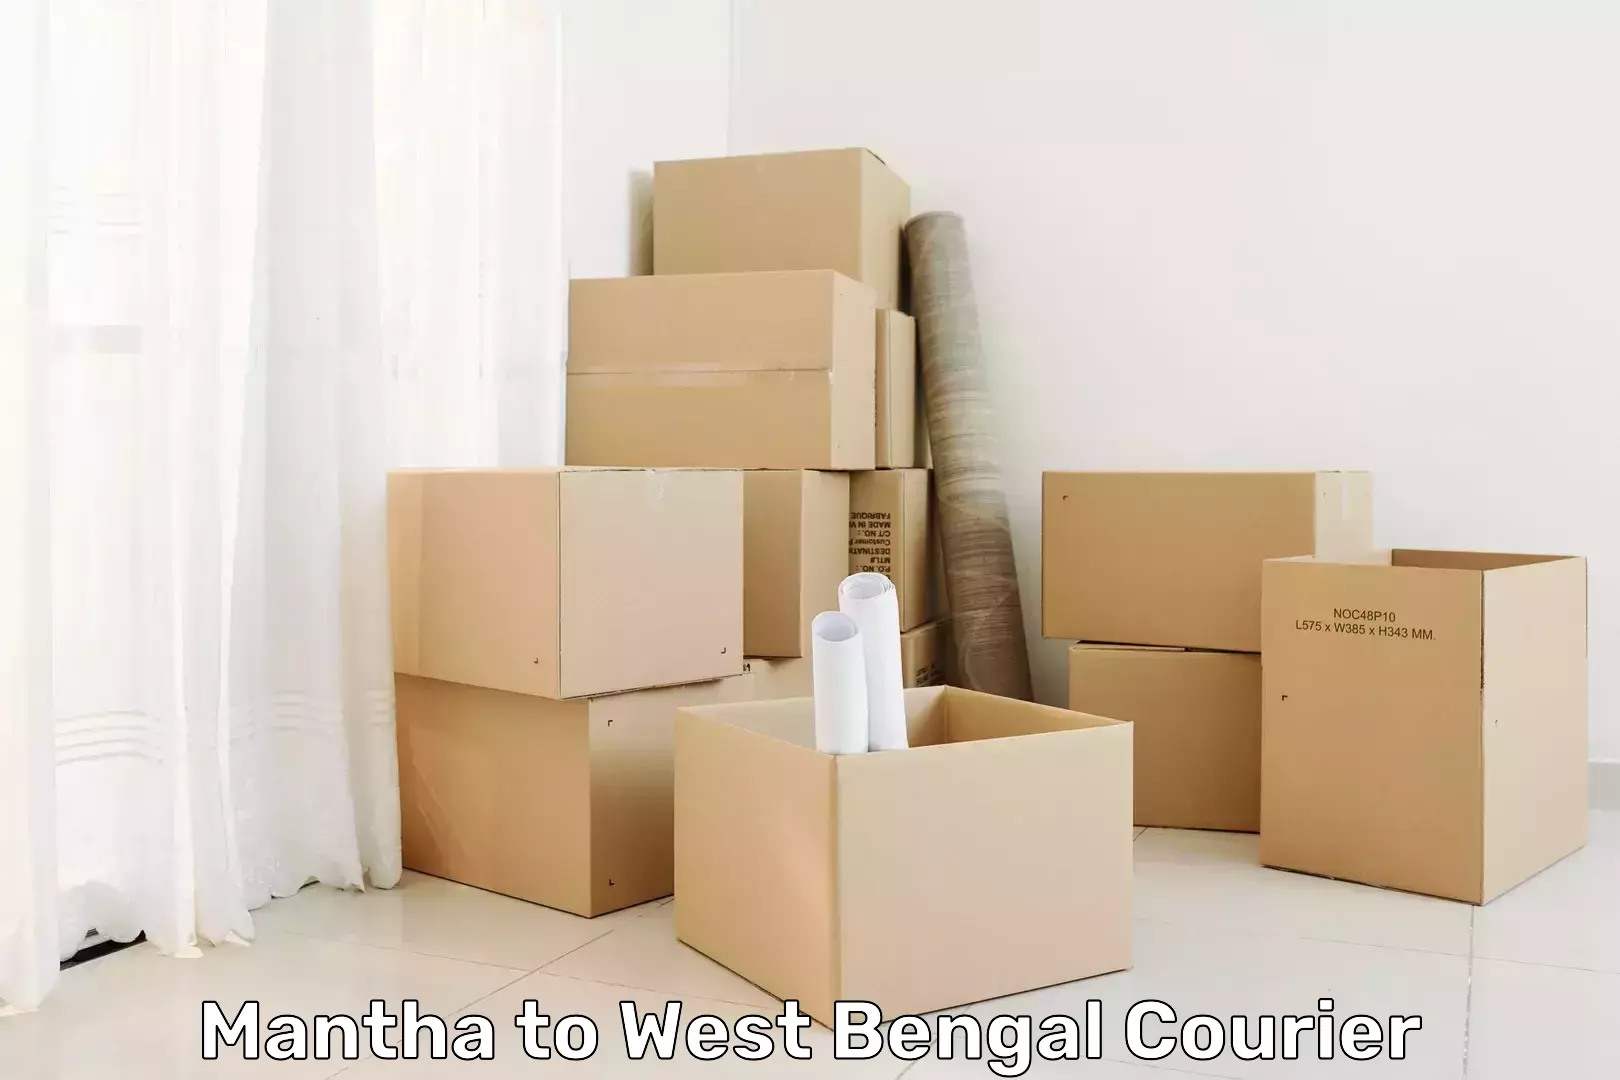 Courier service innovation in Mantha to Kolkata Port